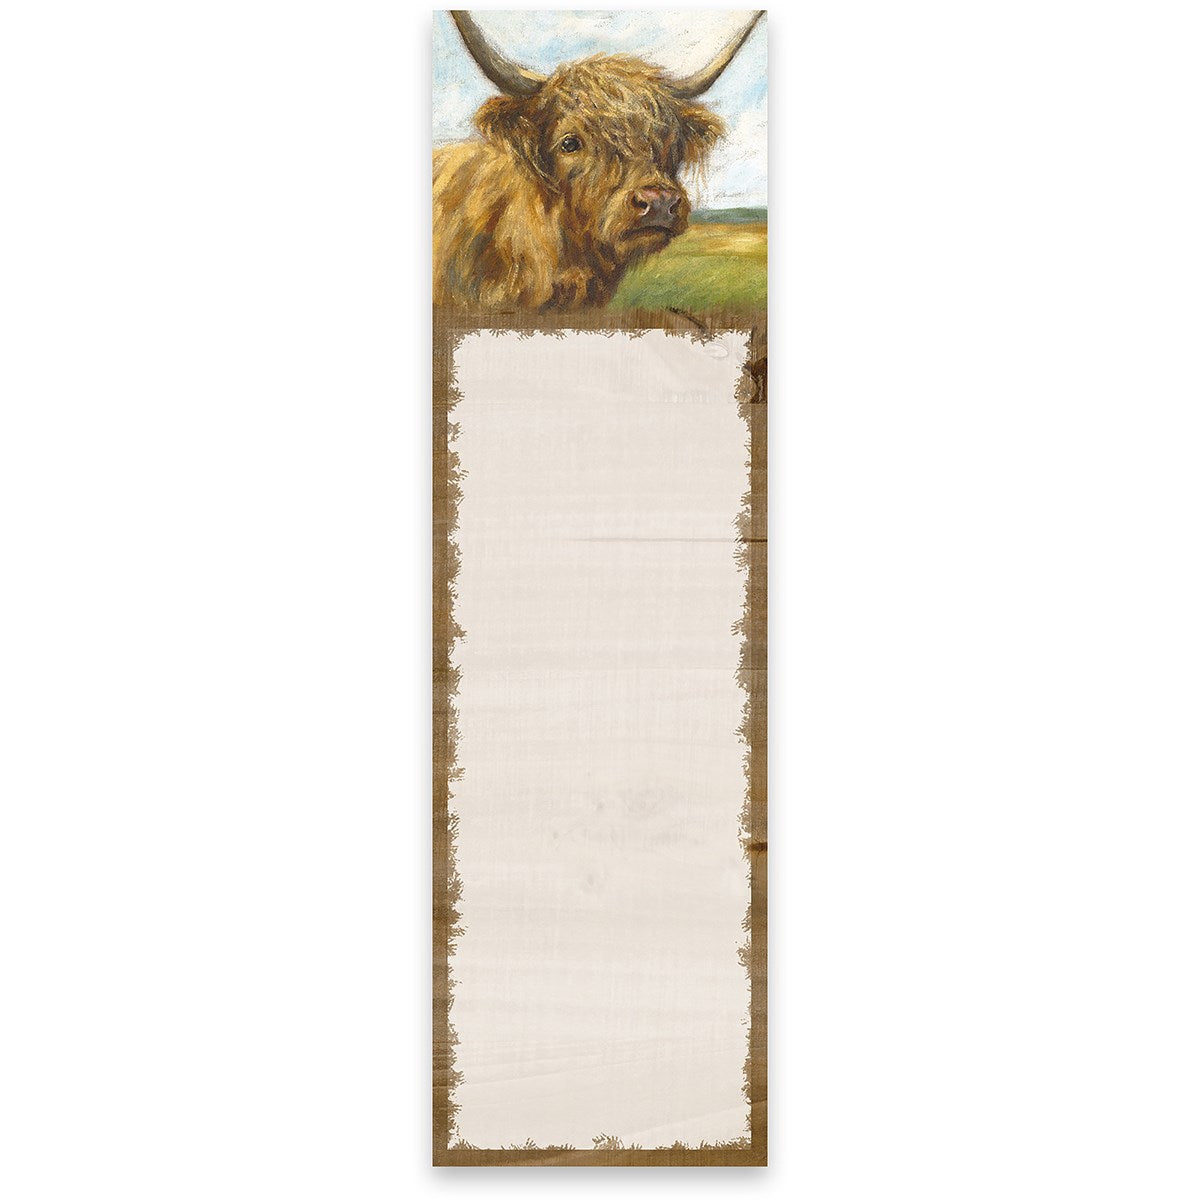 💙 Highland Cow Magnetic List Pad